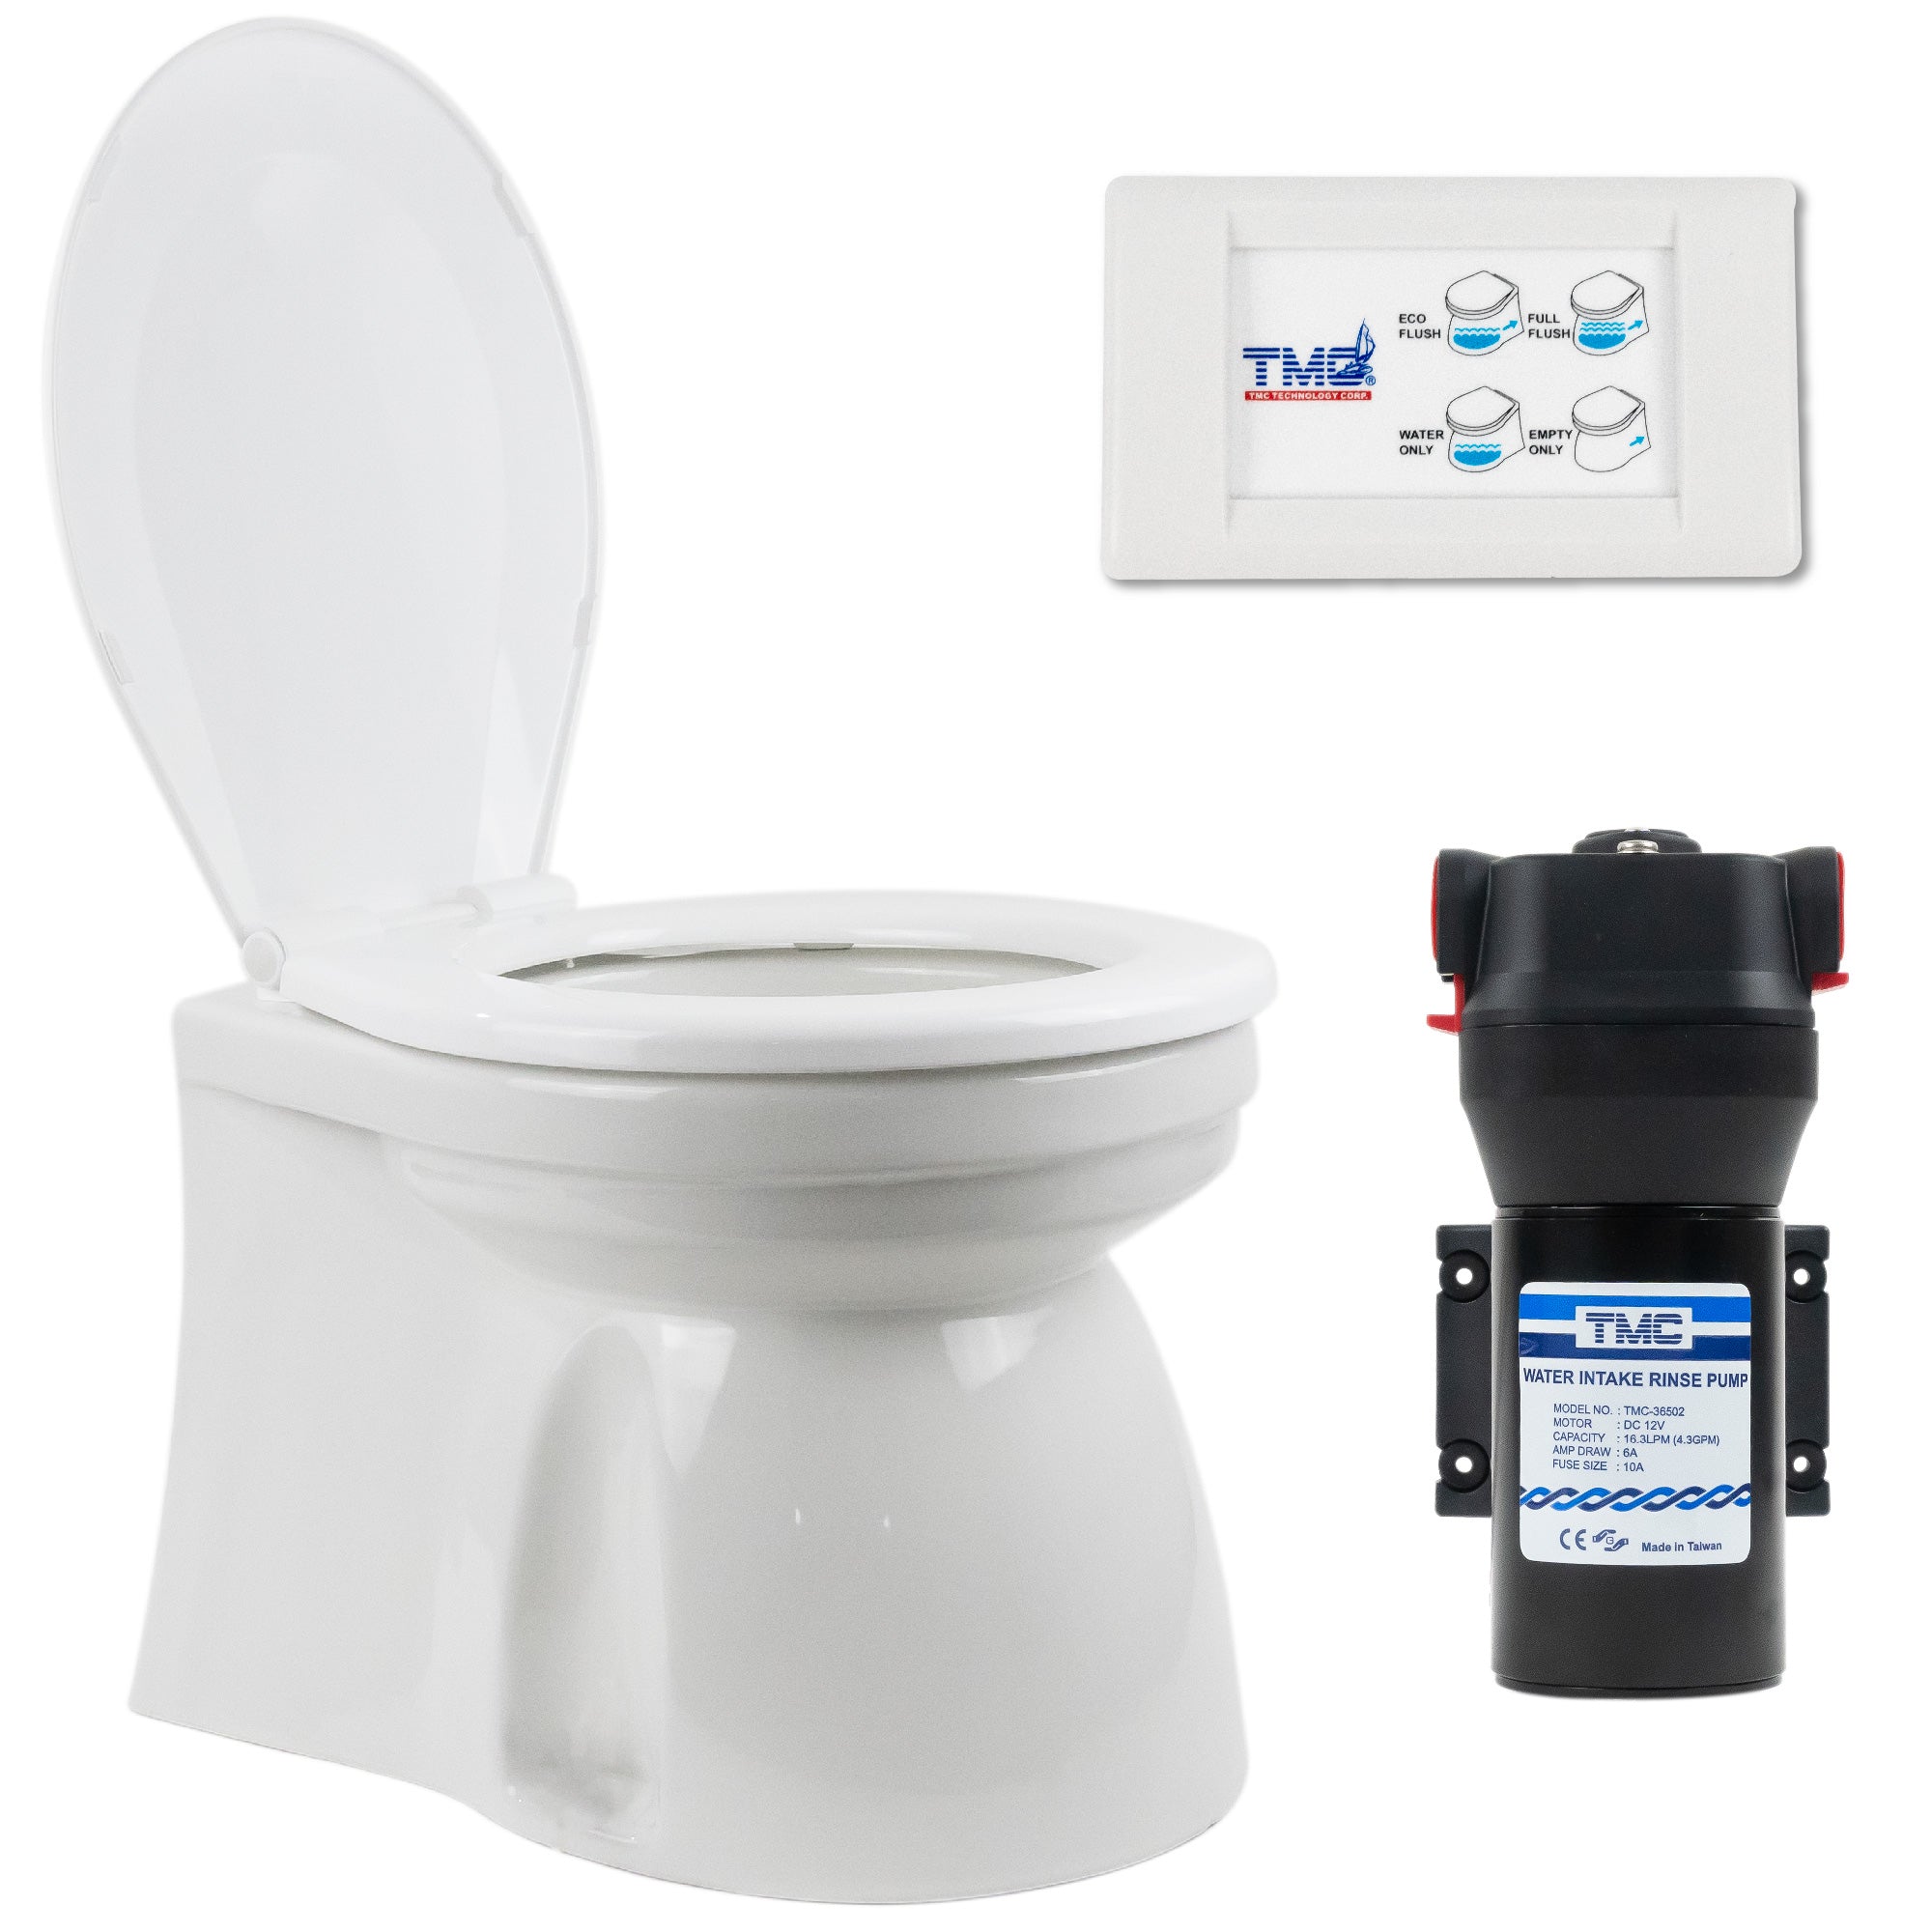 TMC Electric Marine Toilet, RV Toilet, Large Design Bowl, Household Style Heavy-Duty Built-In Macerator Pump and Rise Pump, 12V- FO4427